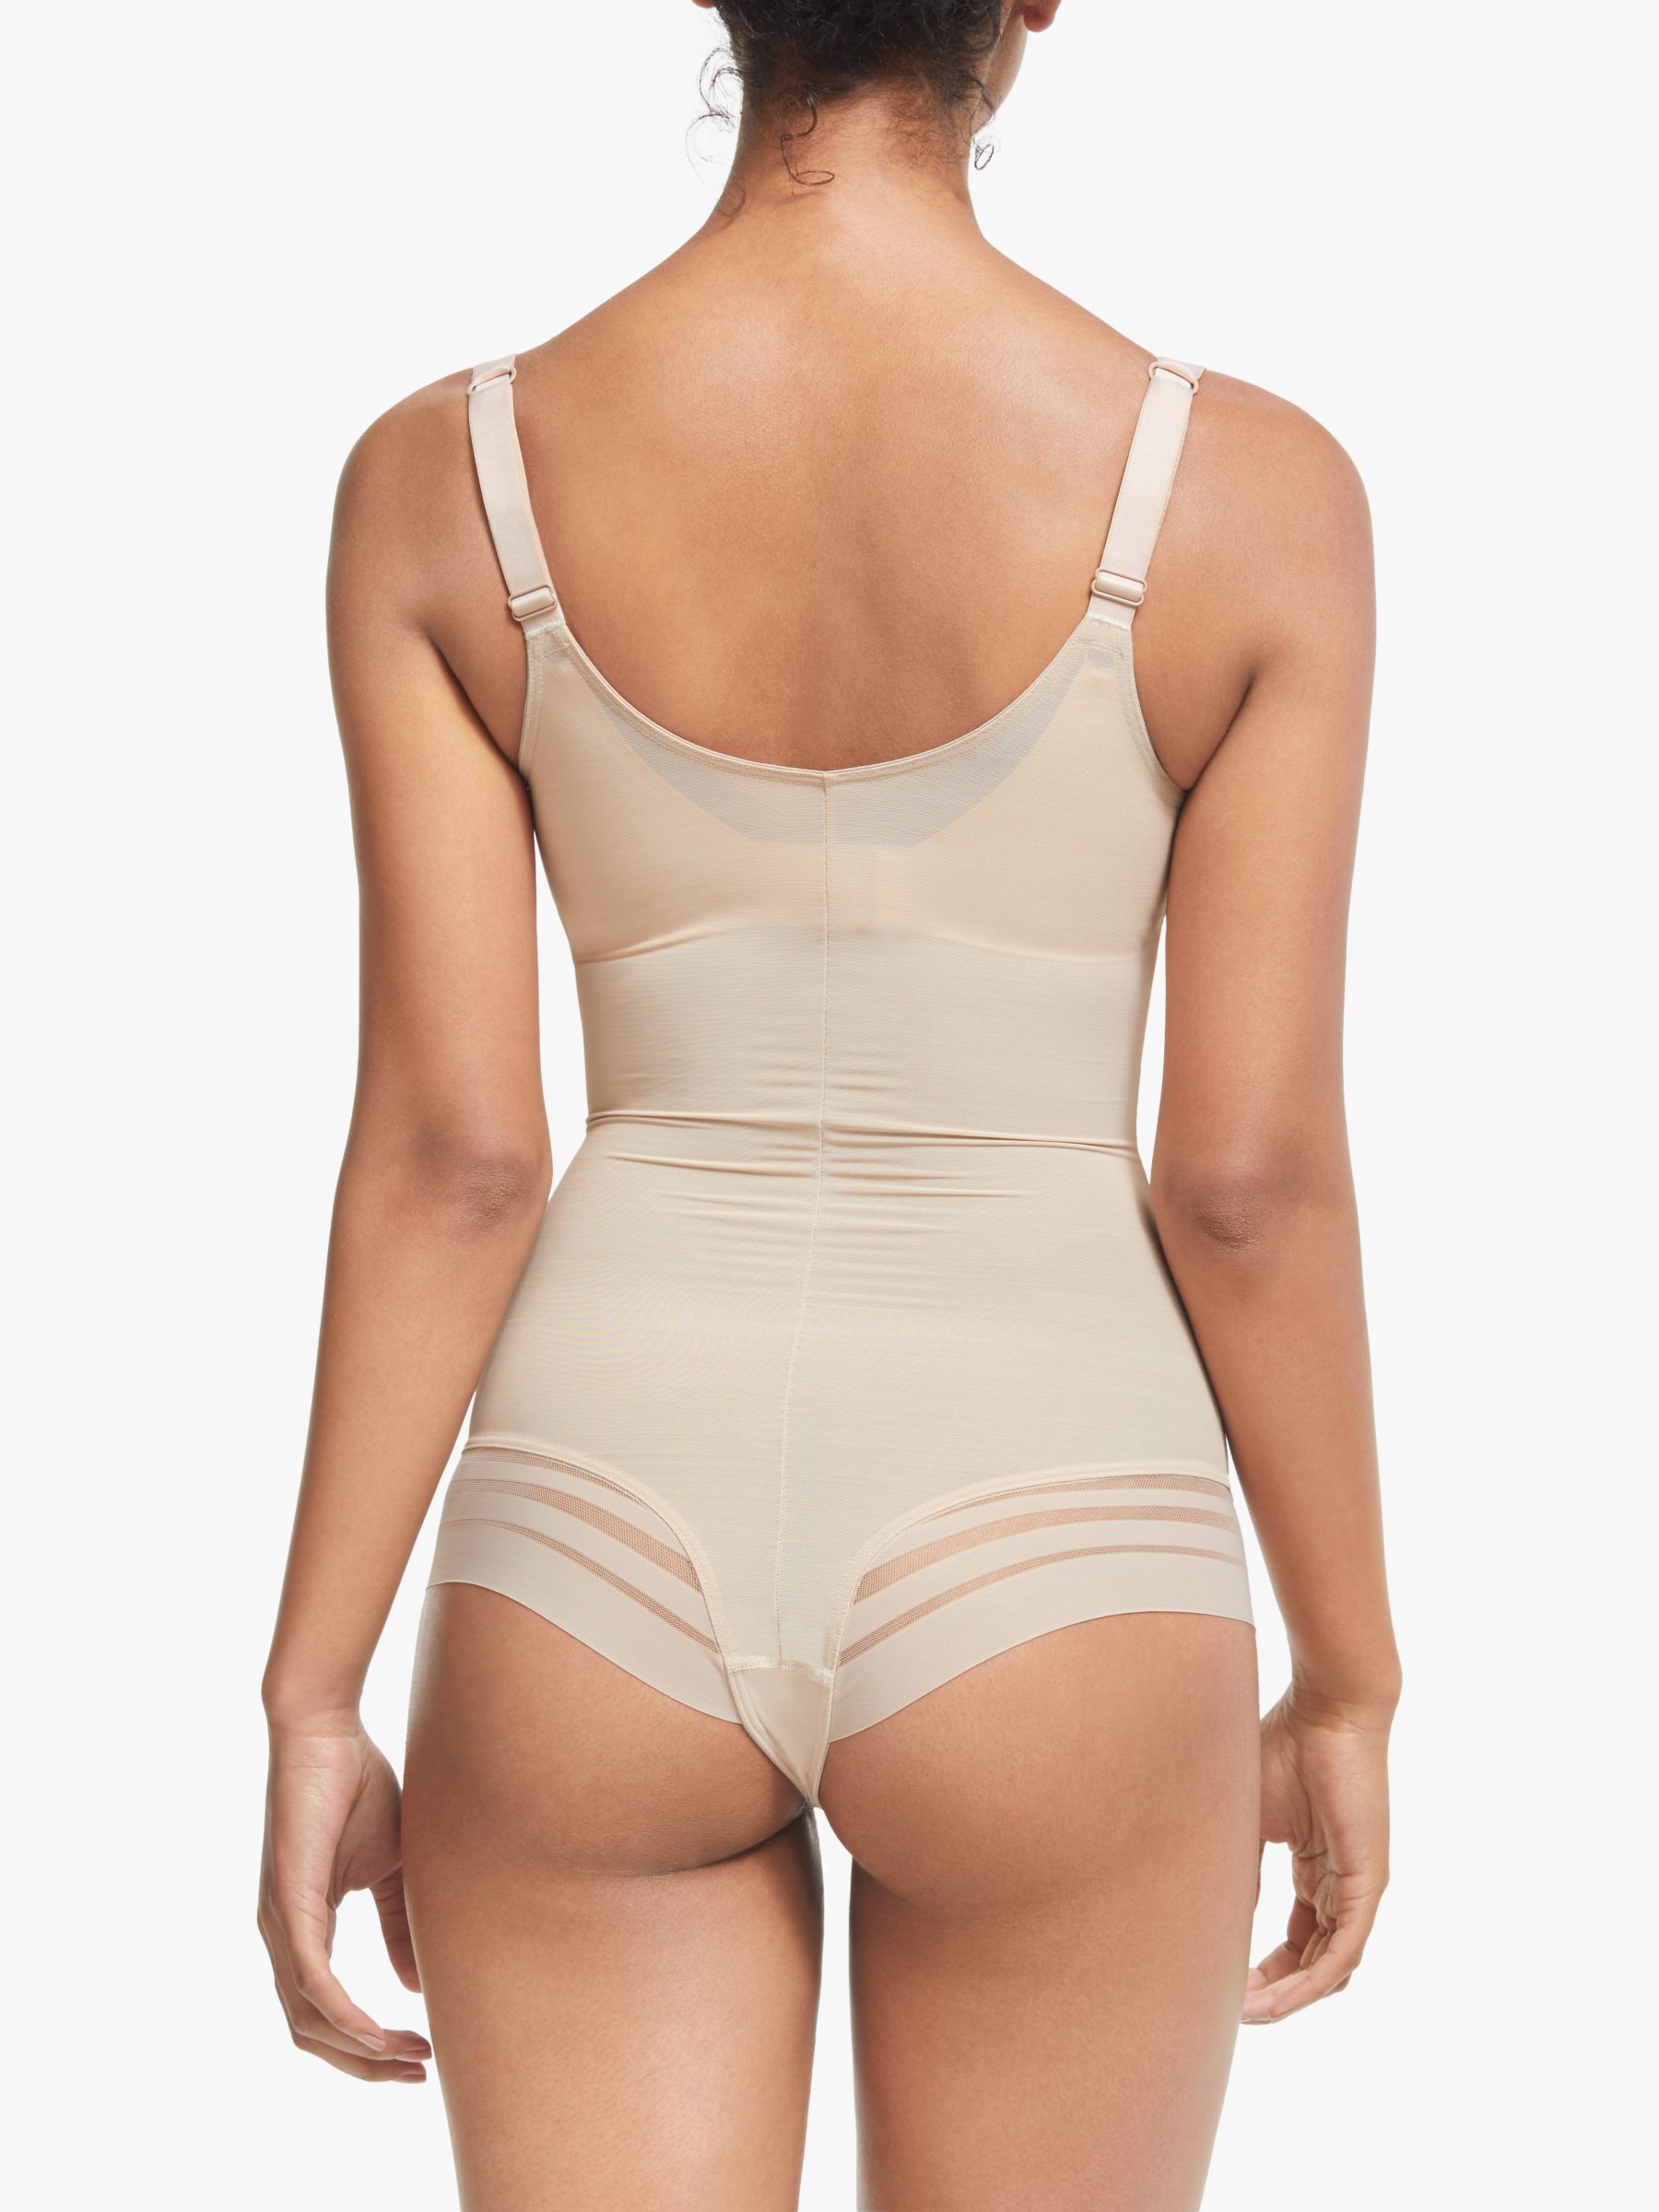 John Lewis — Lingerie and Shapewear – Charlie Smith Design